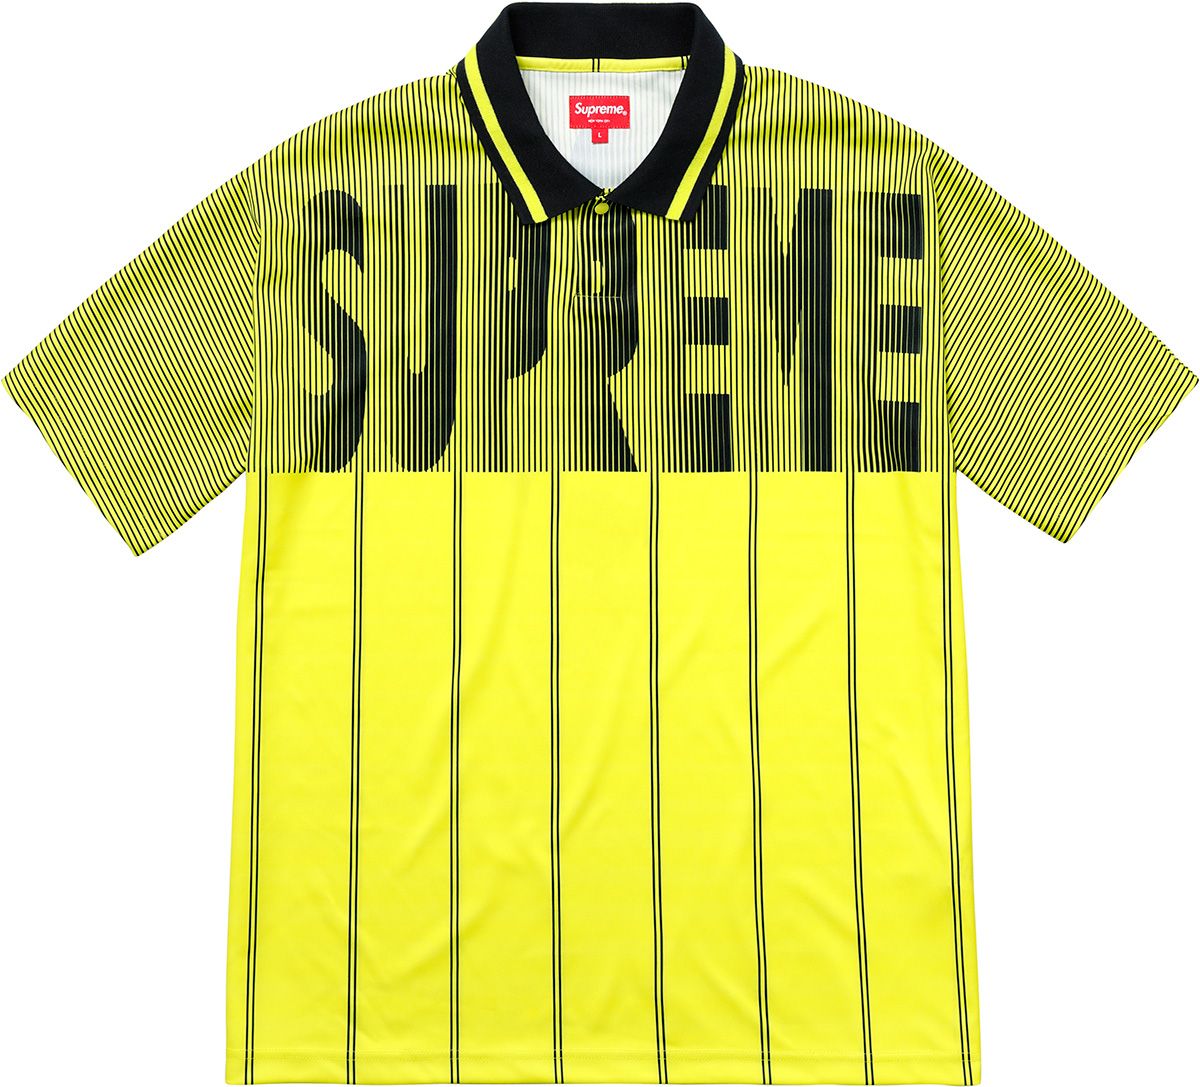 Reflective Sleeve Stripe Rugby - Spring/Summer 2018 Preview – Supreme